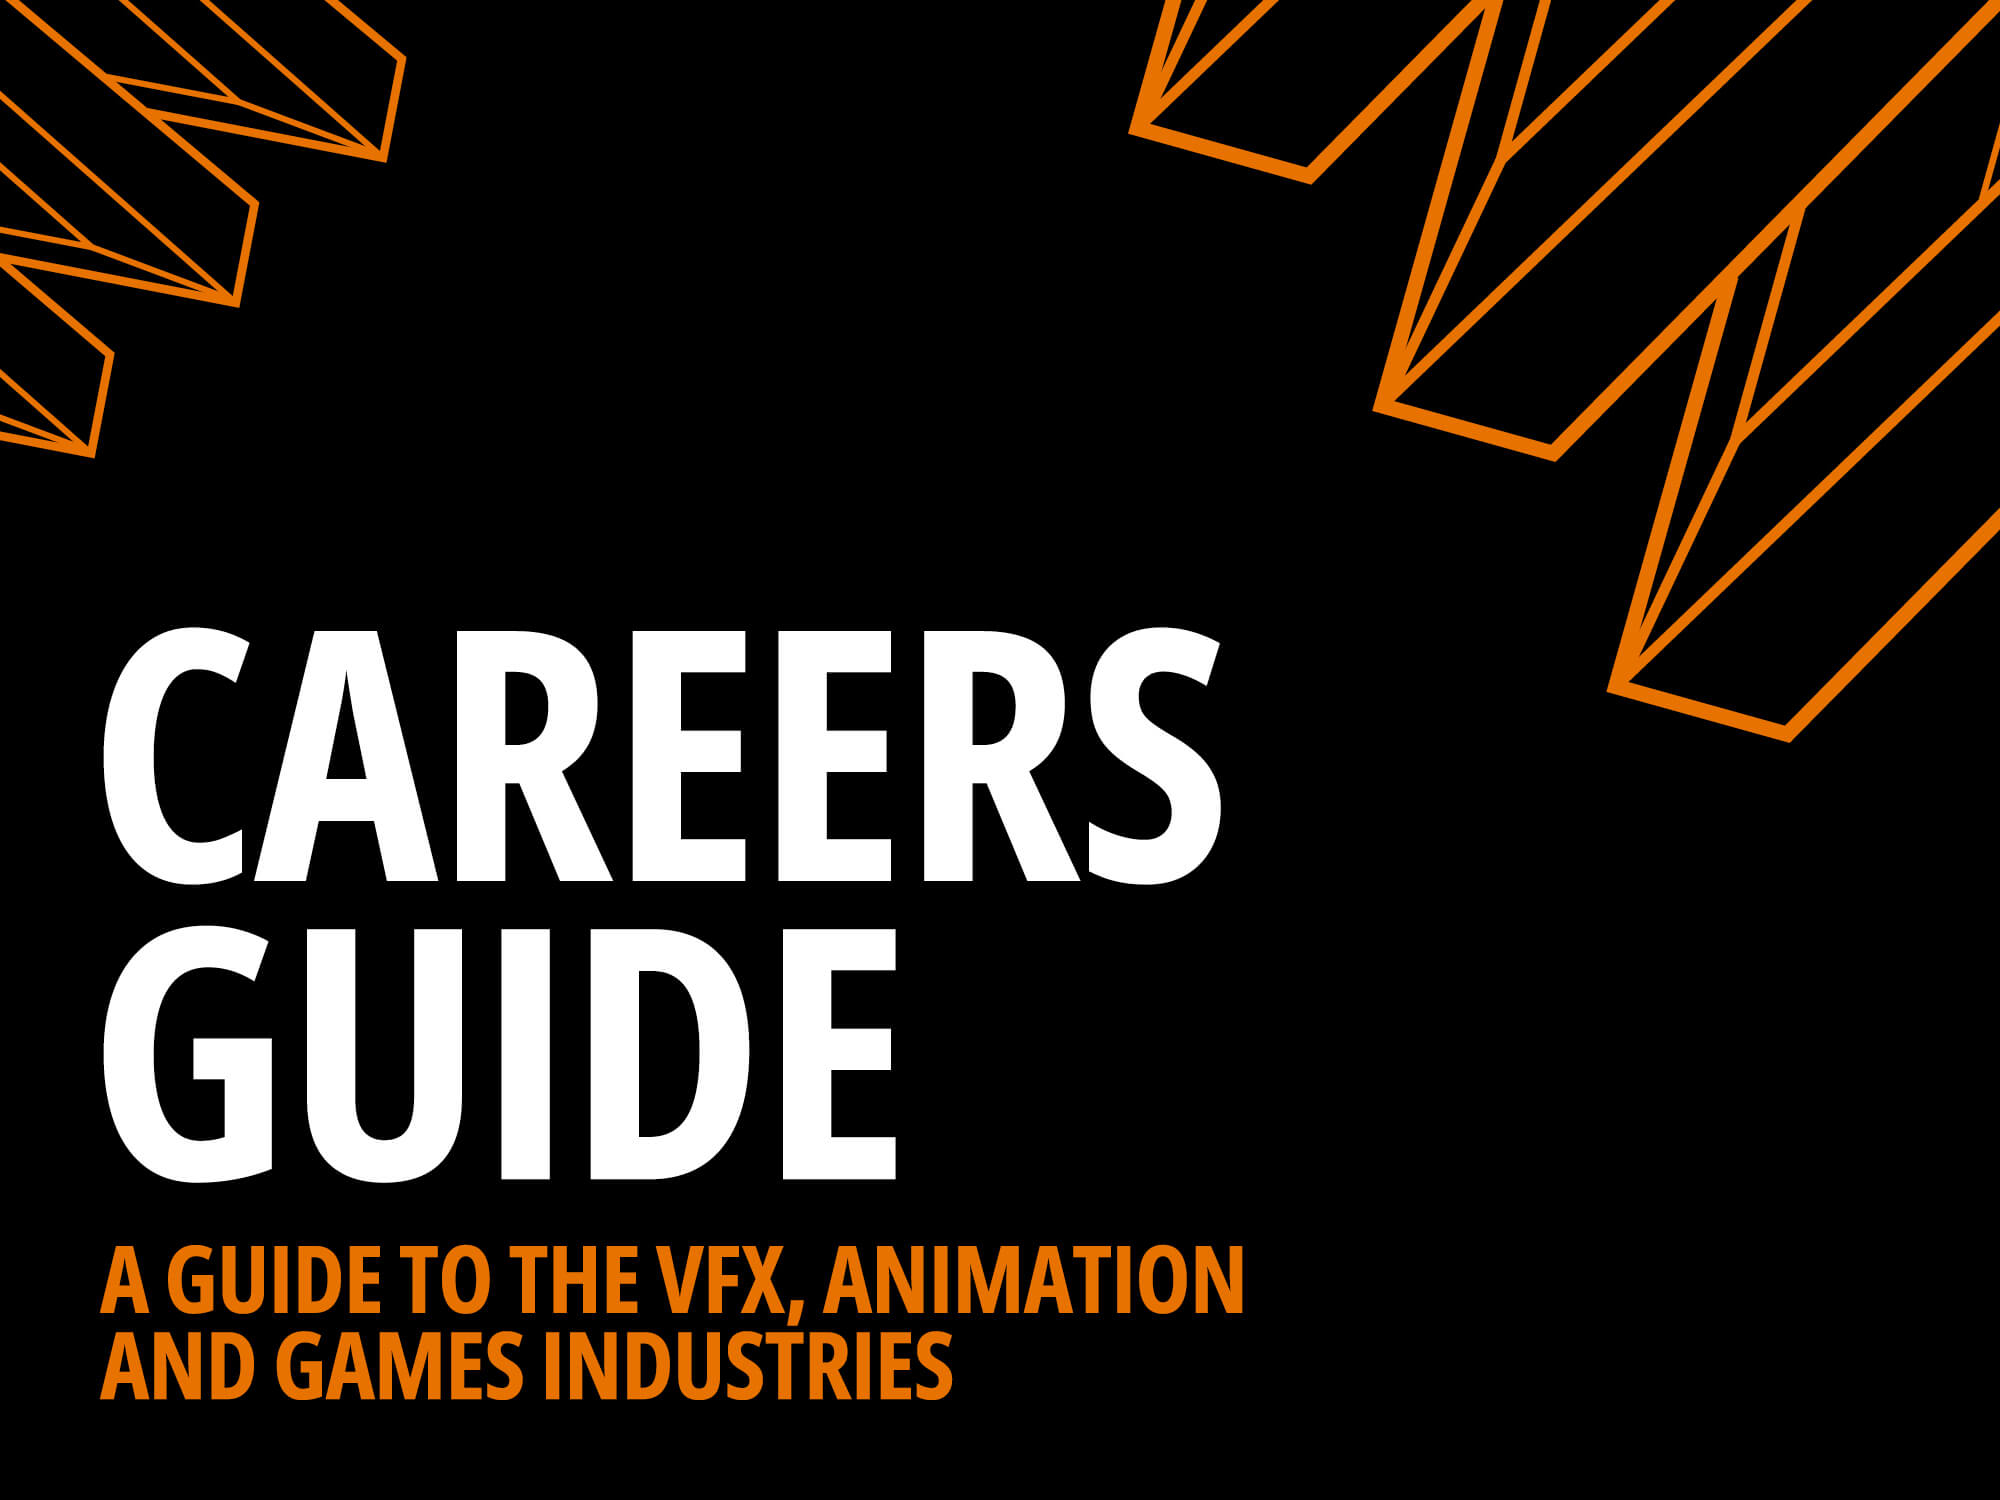 Careers Guide image orange graphic lines on black background